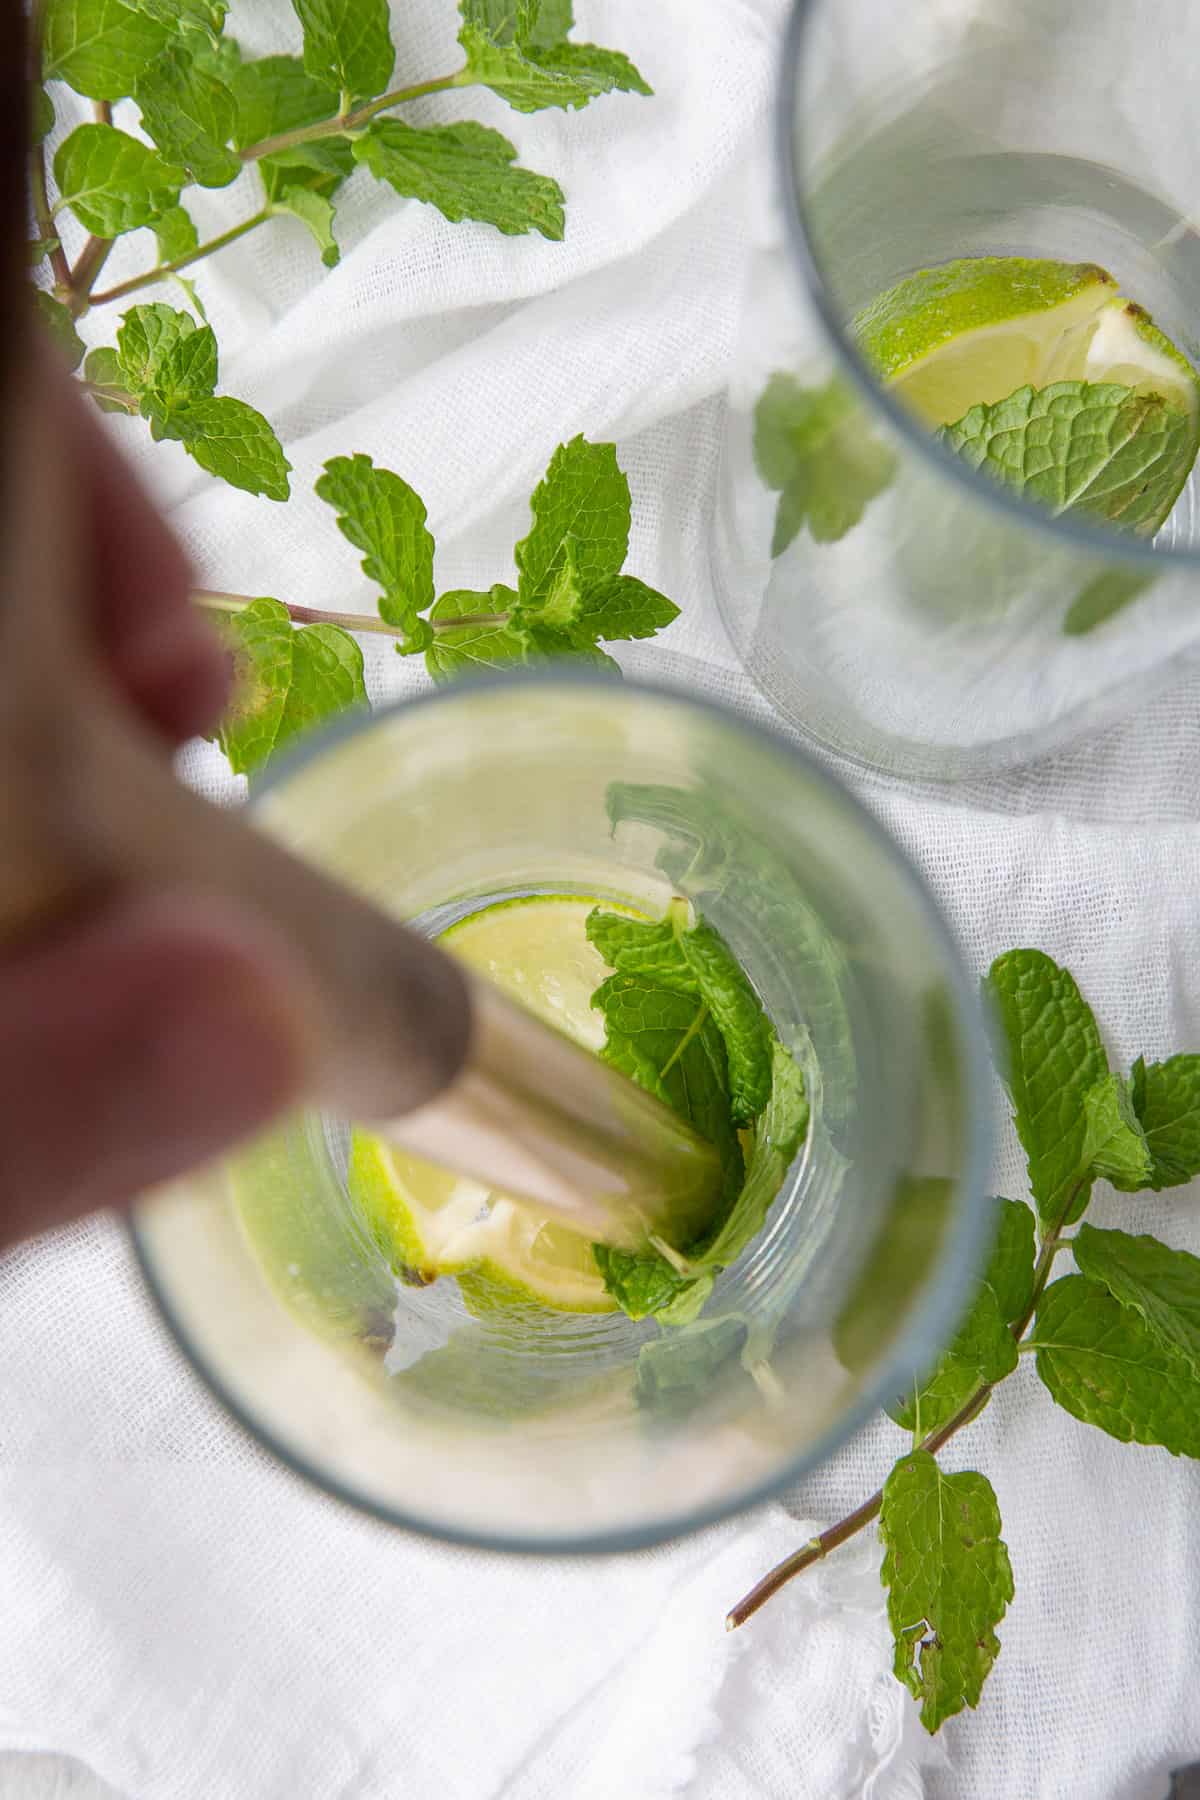 wooden spoon muddling limes and mint leaves.